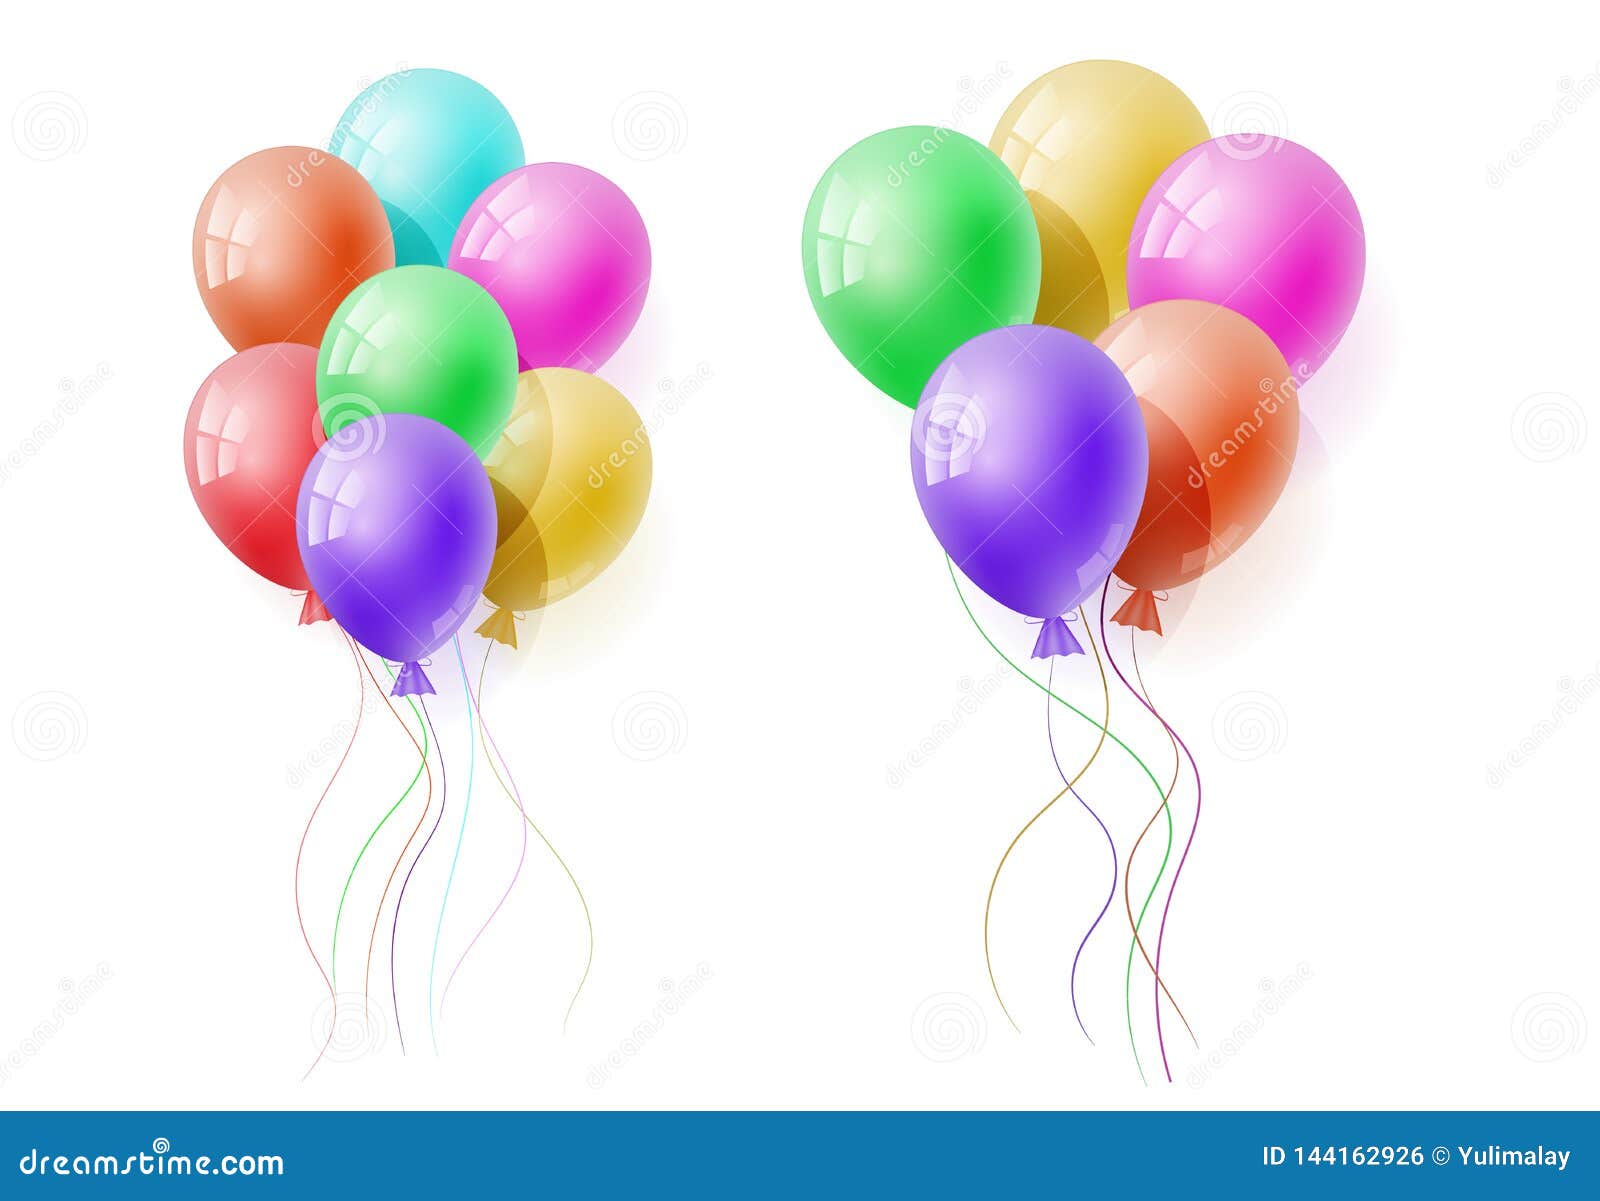 Vector 3d Realistic Balloon Stock Vector Illustration Of Play Images, Photos, Reviews